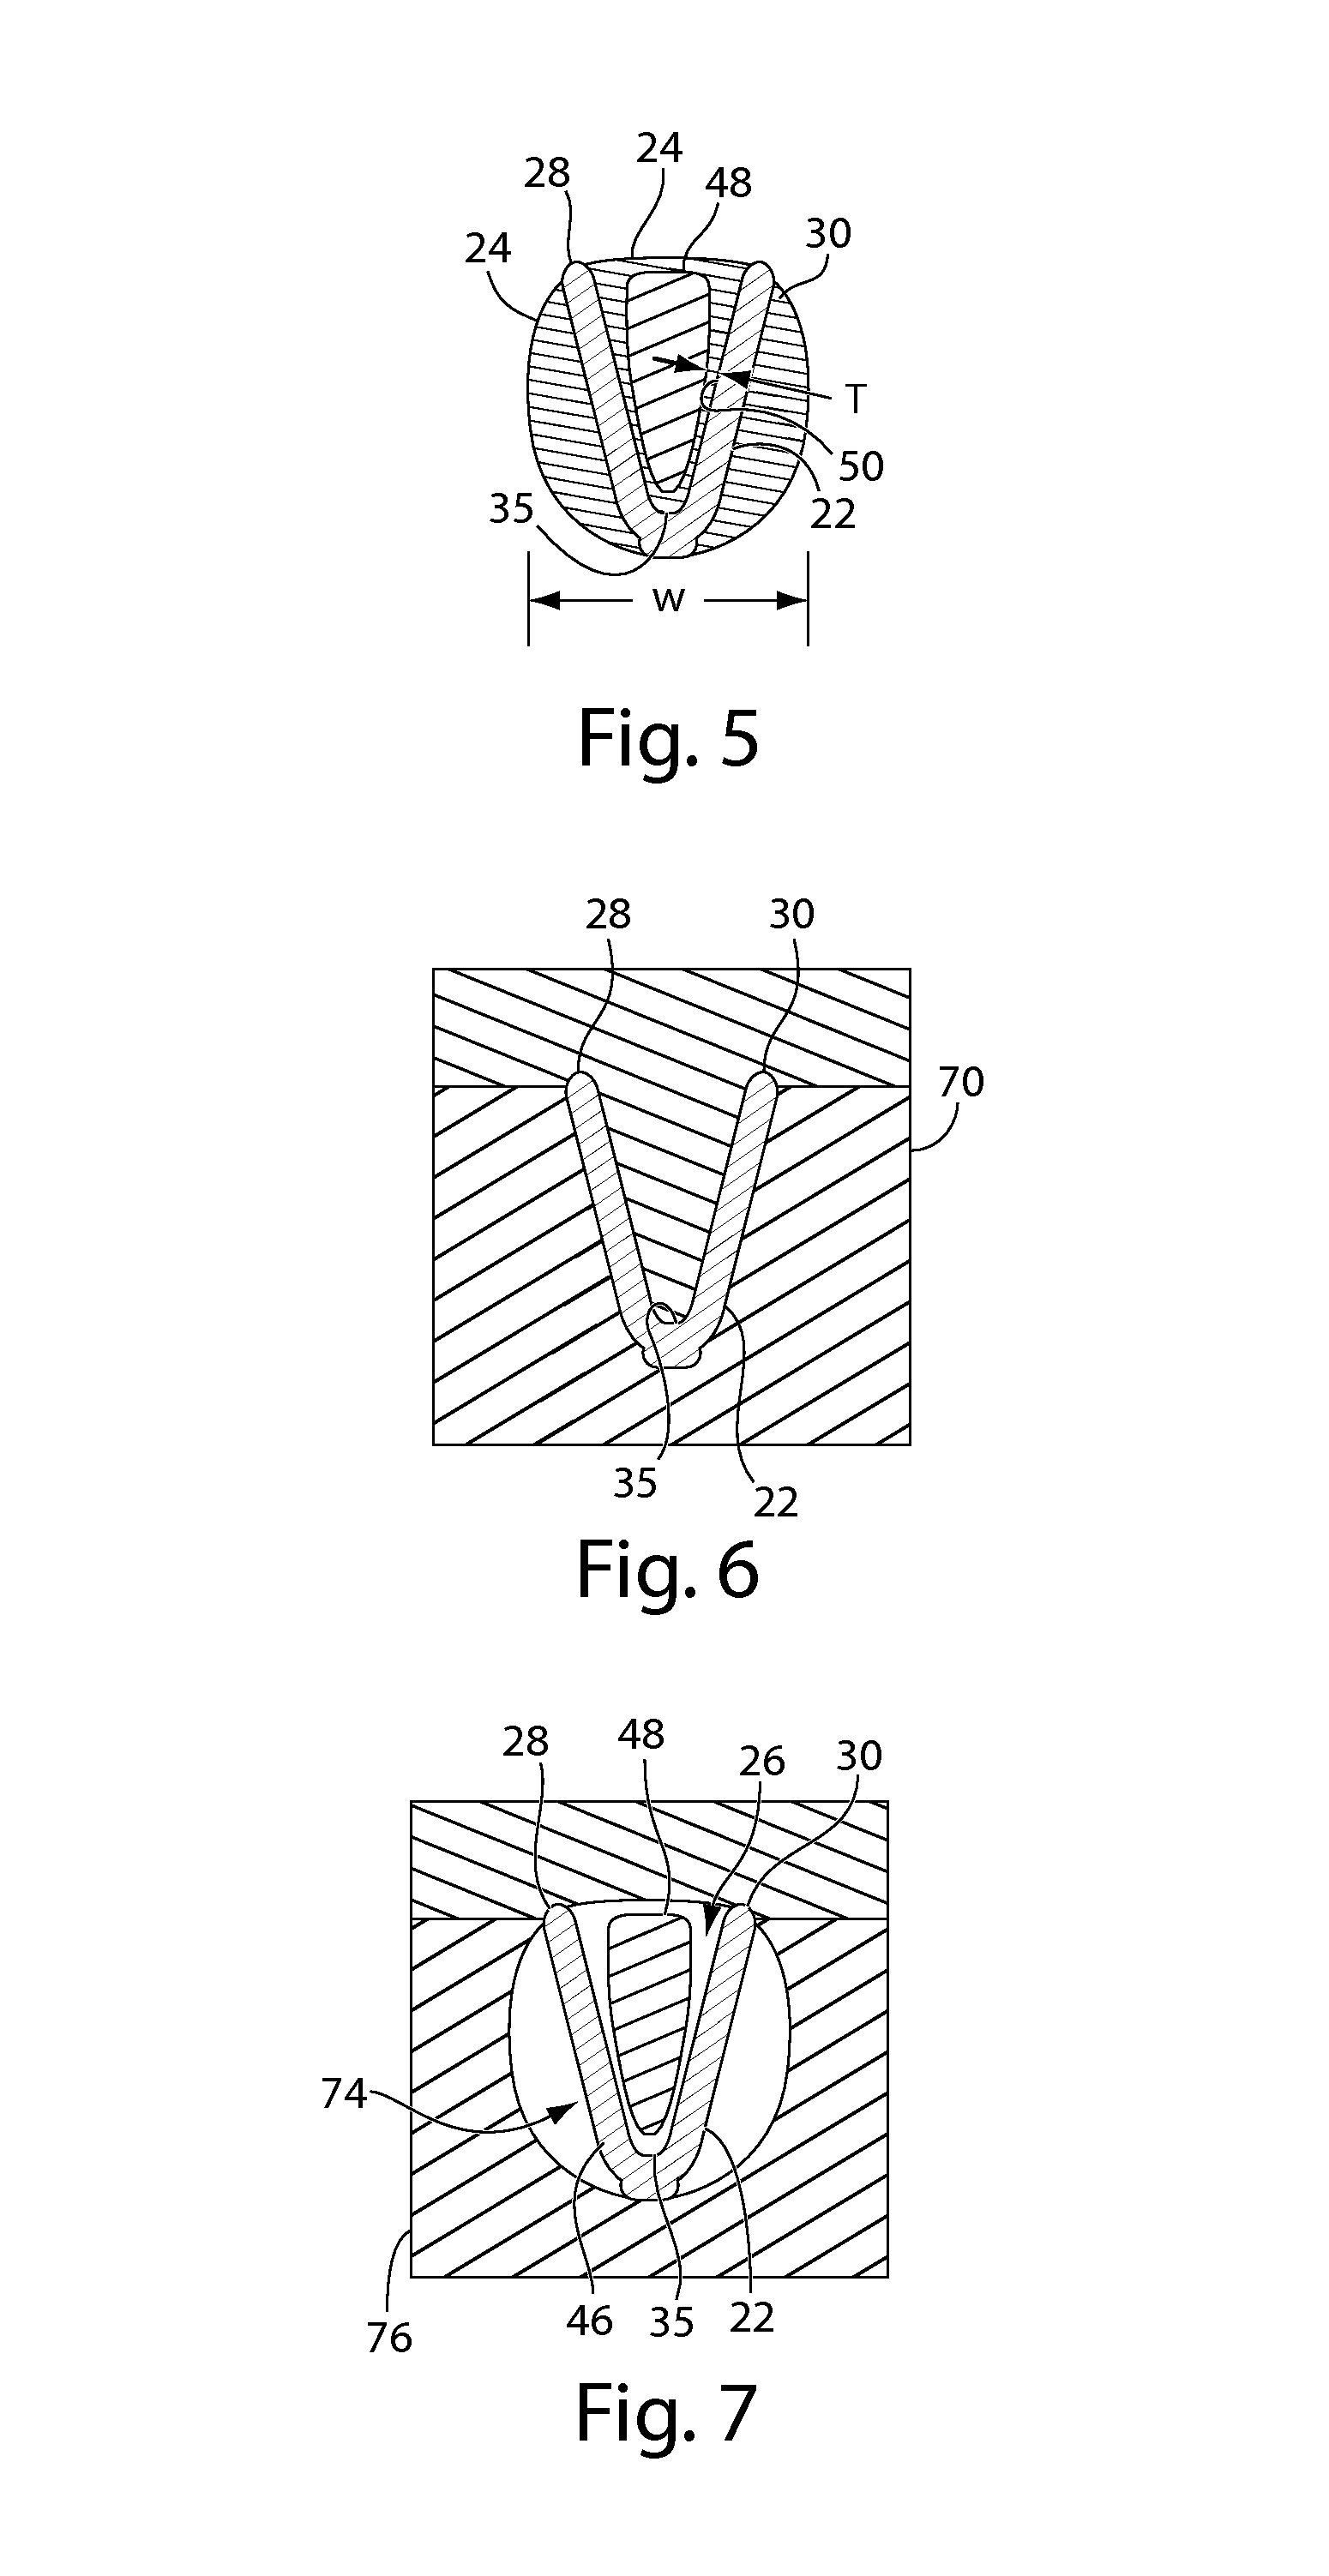 Method for making a handle for a personal grooming device